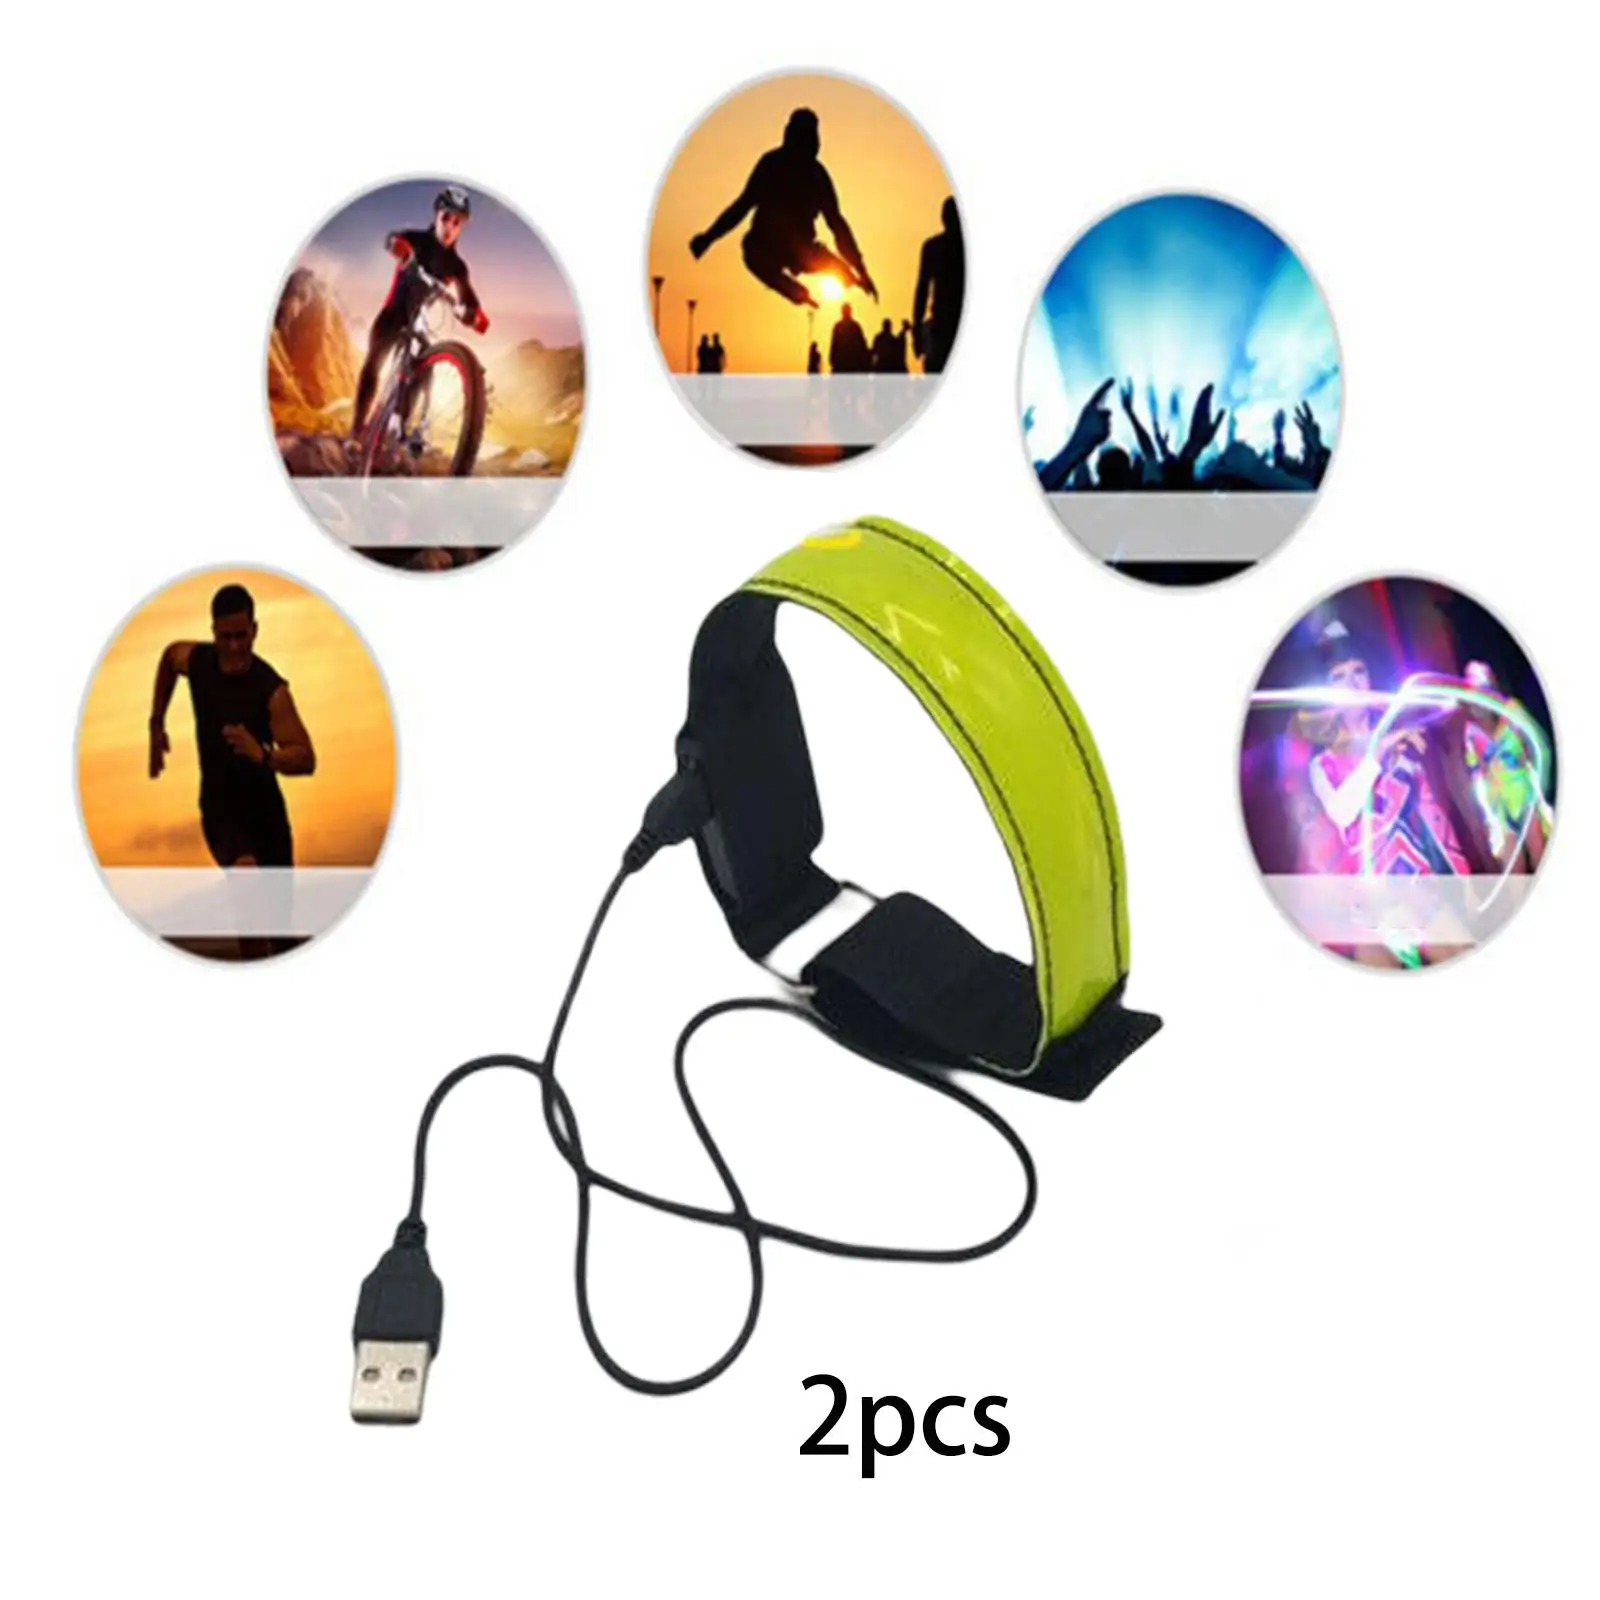 2Pcs USB Rechargeable LED Armbands High Visibility Reflective for Running